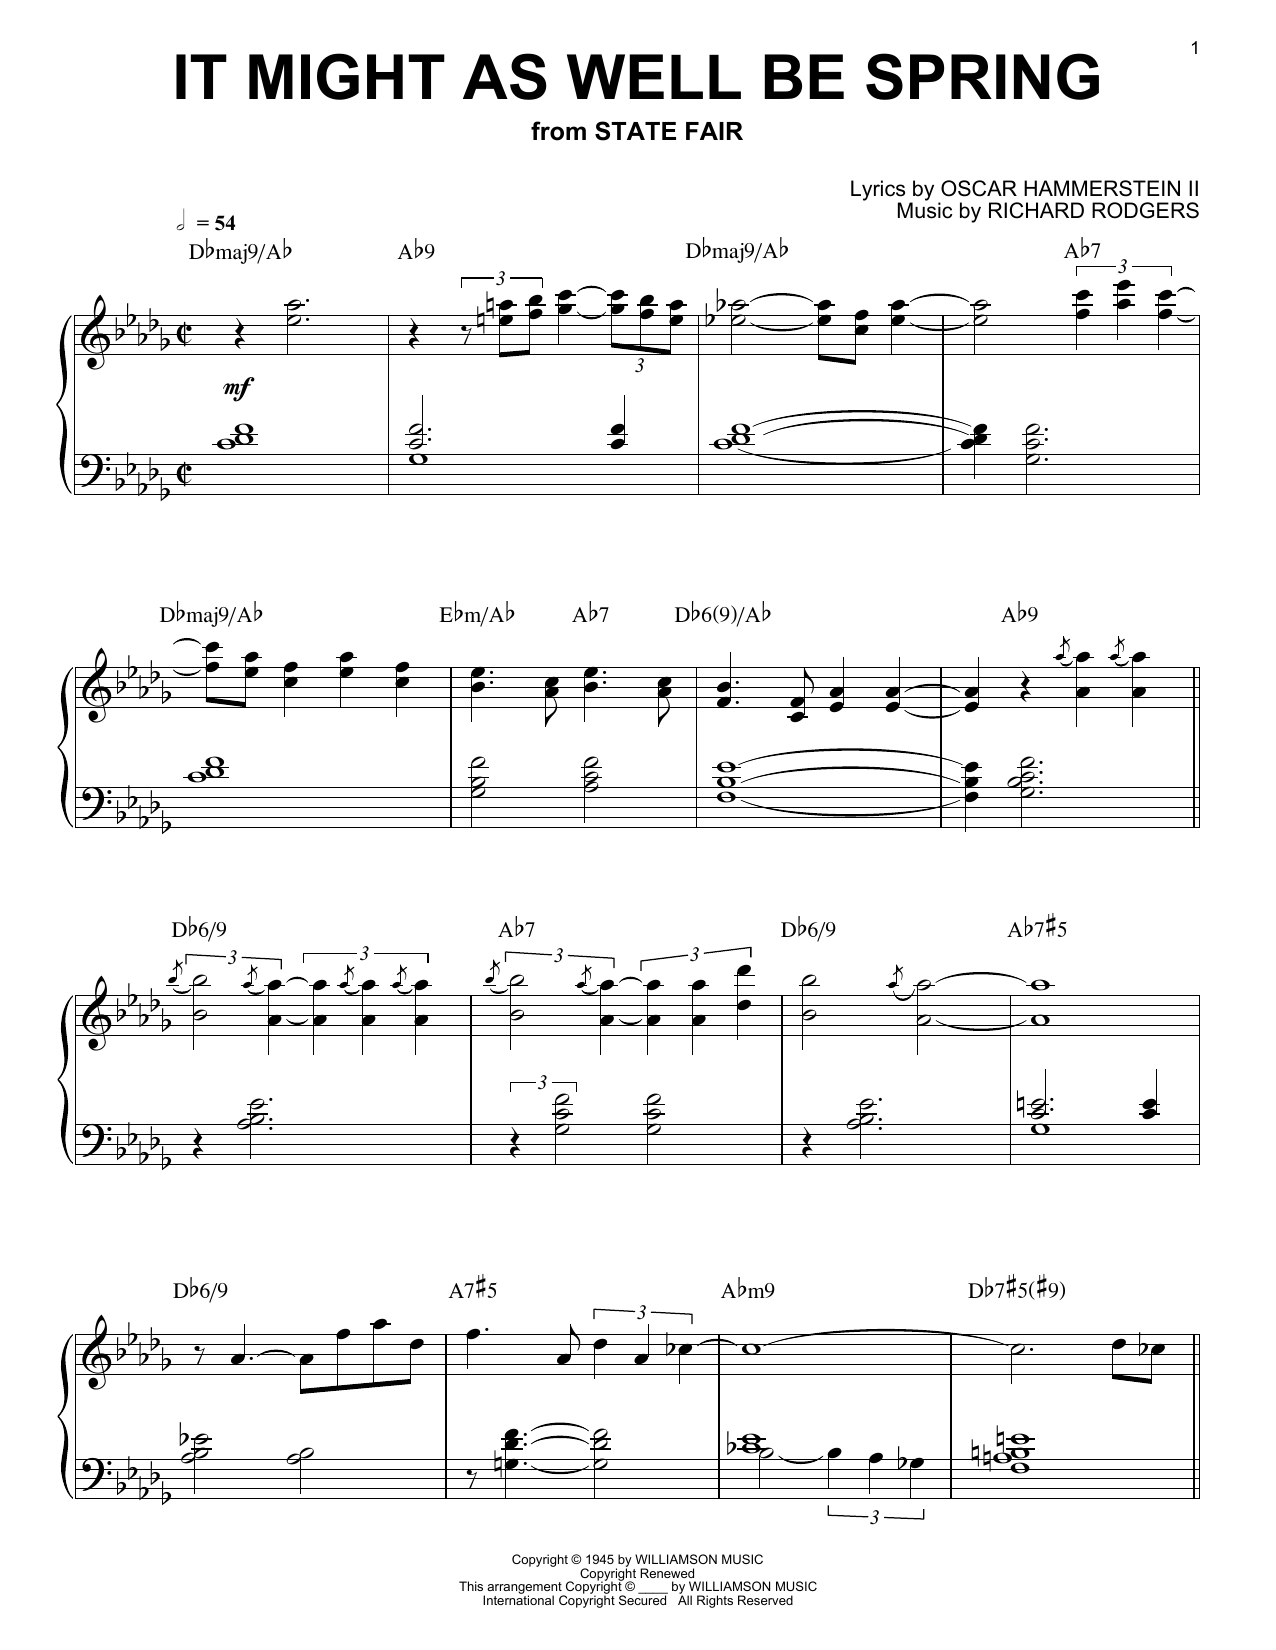 Bill Evans It Might As Well Be Spring sheet music notes and chords. Download Printable PDF.